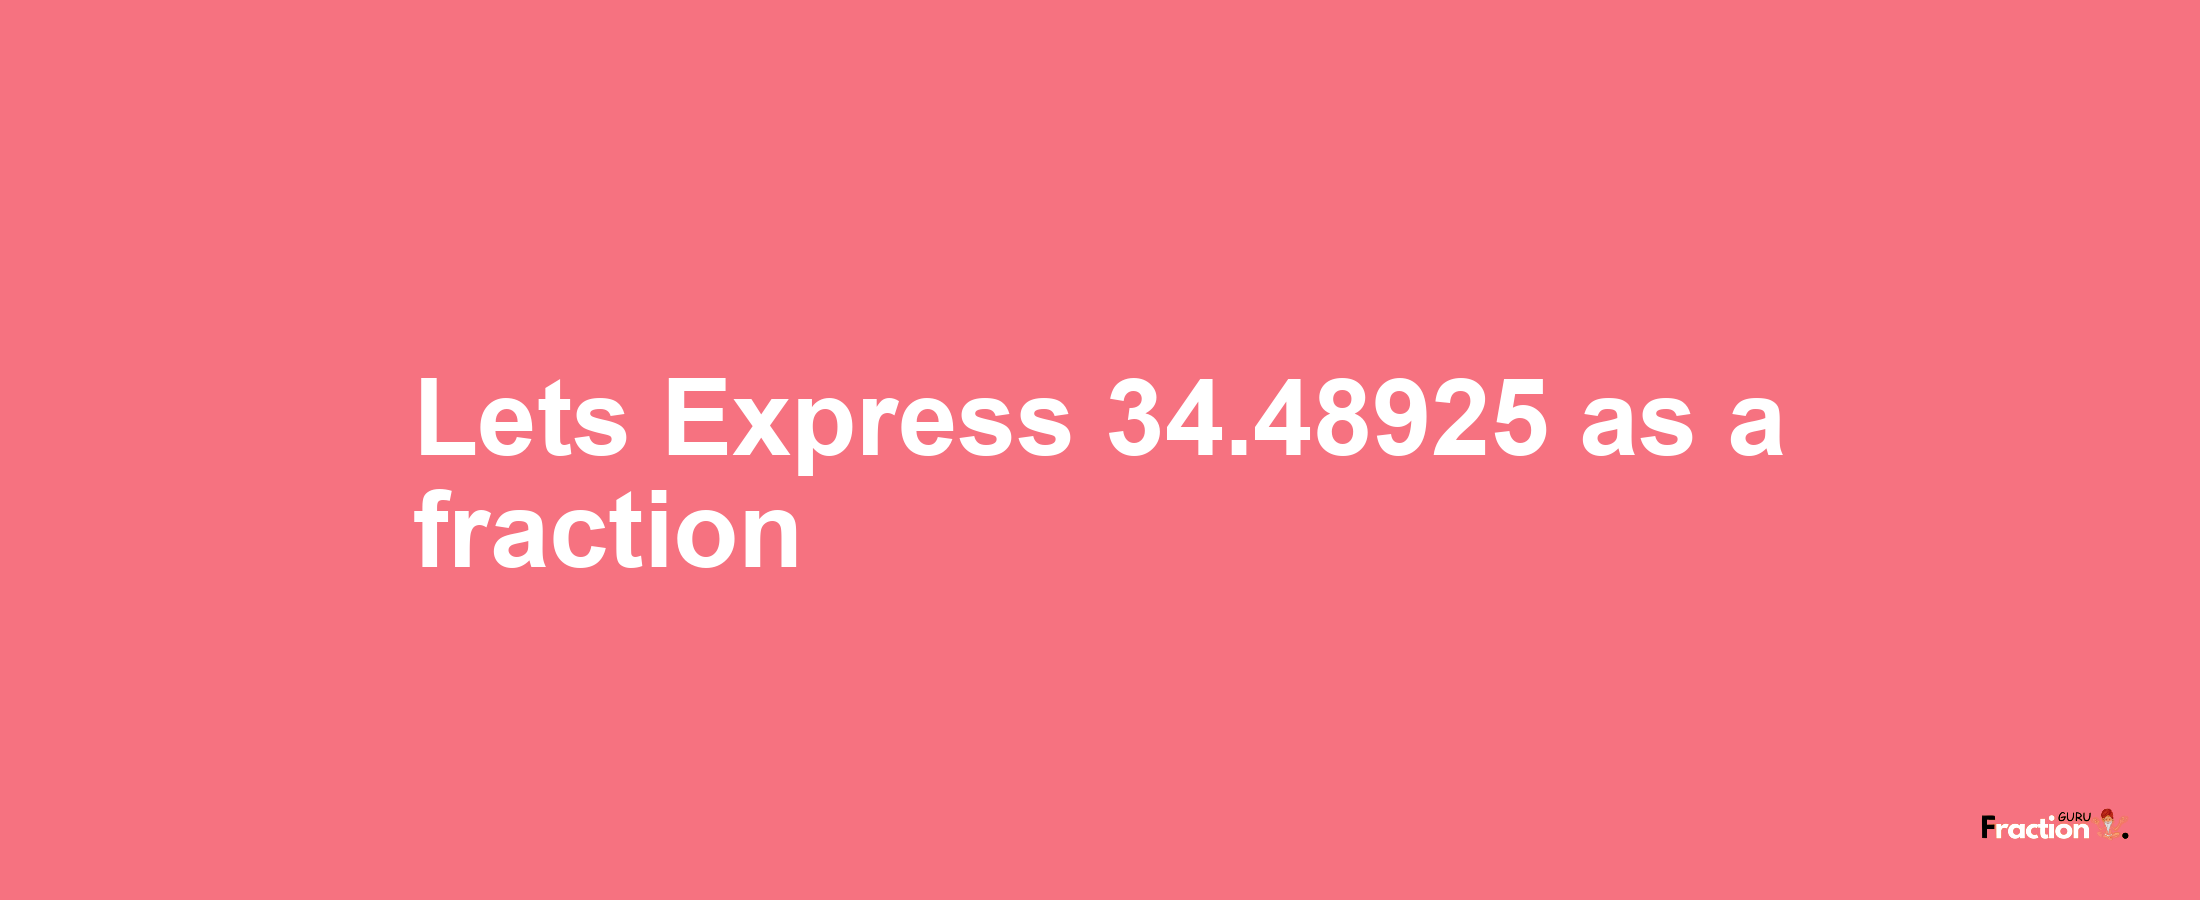 Lets Express 34.48925 as afraction